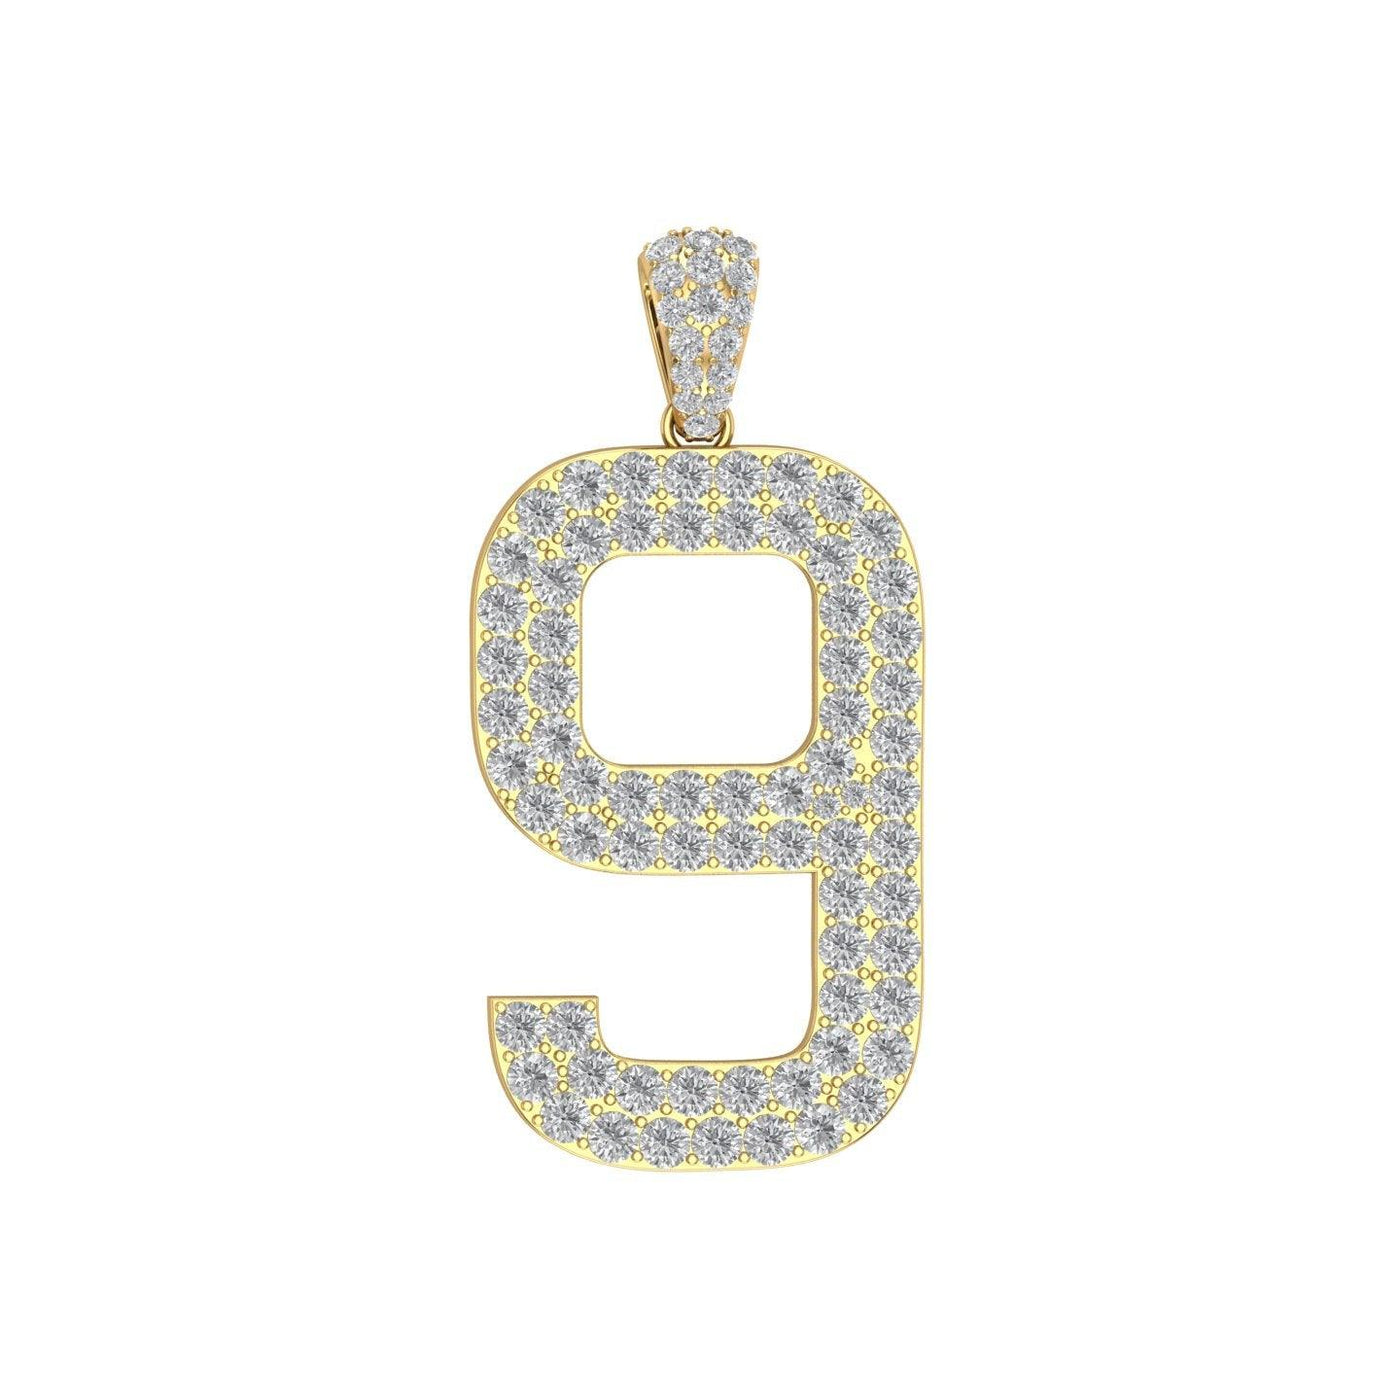 Gold Color Pendant in the Shape of 9 Made of 925 Sterling Silver Material with 20 Inch Long Silver Chain